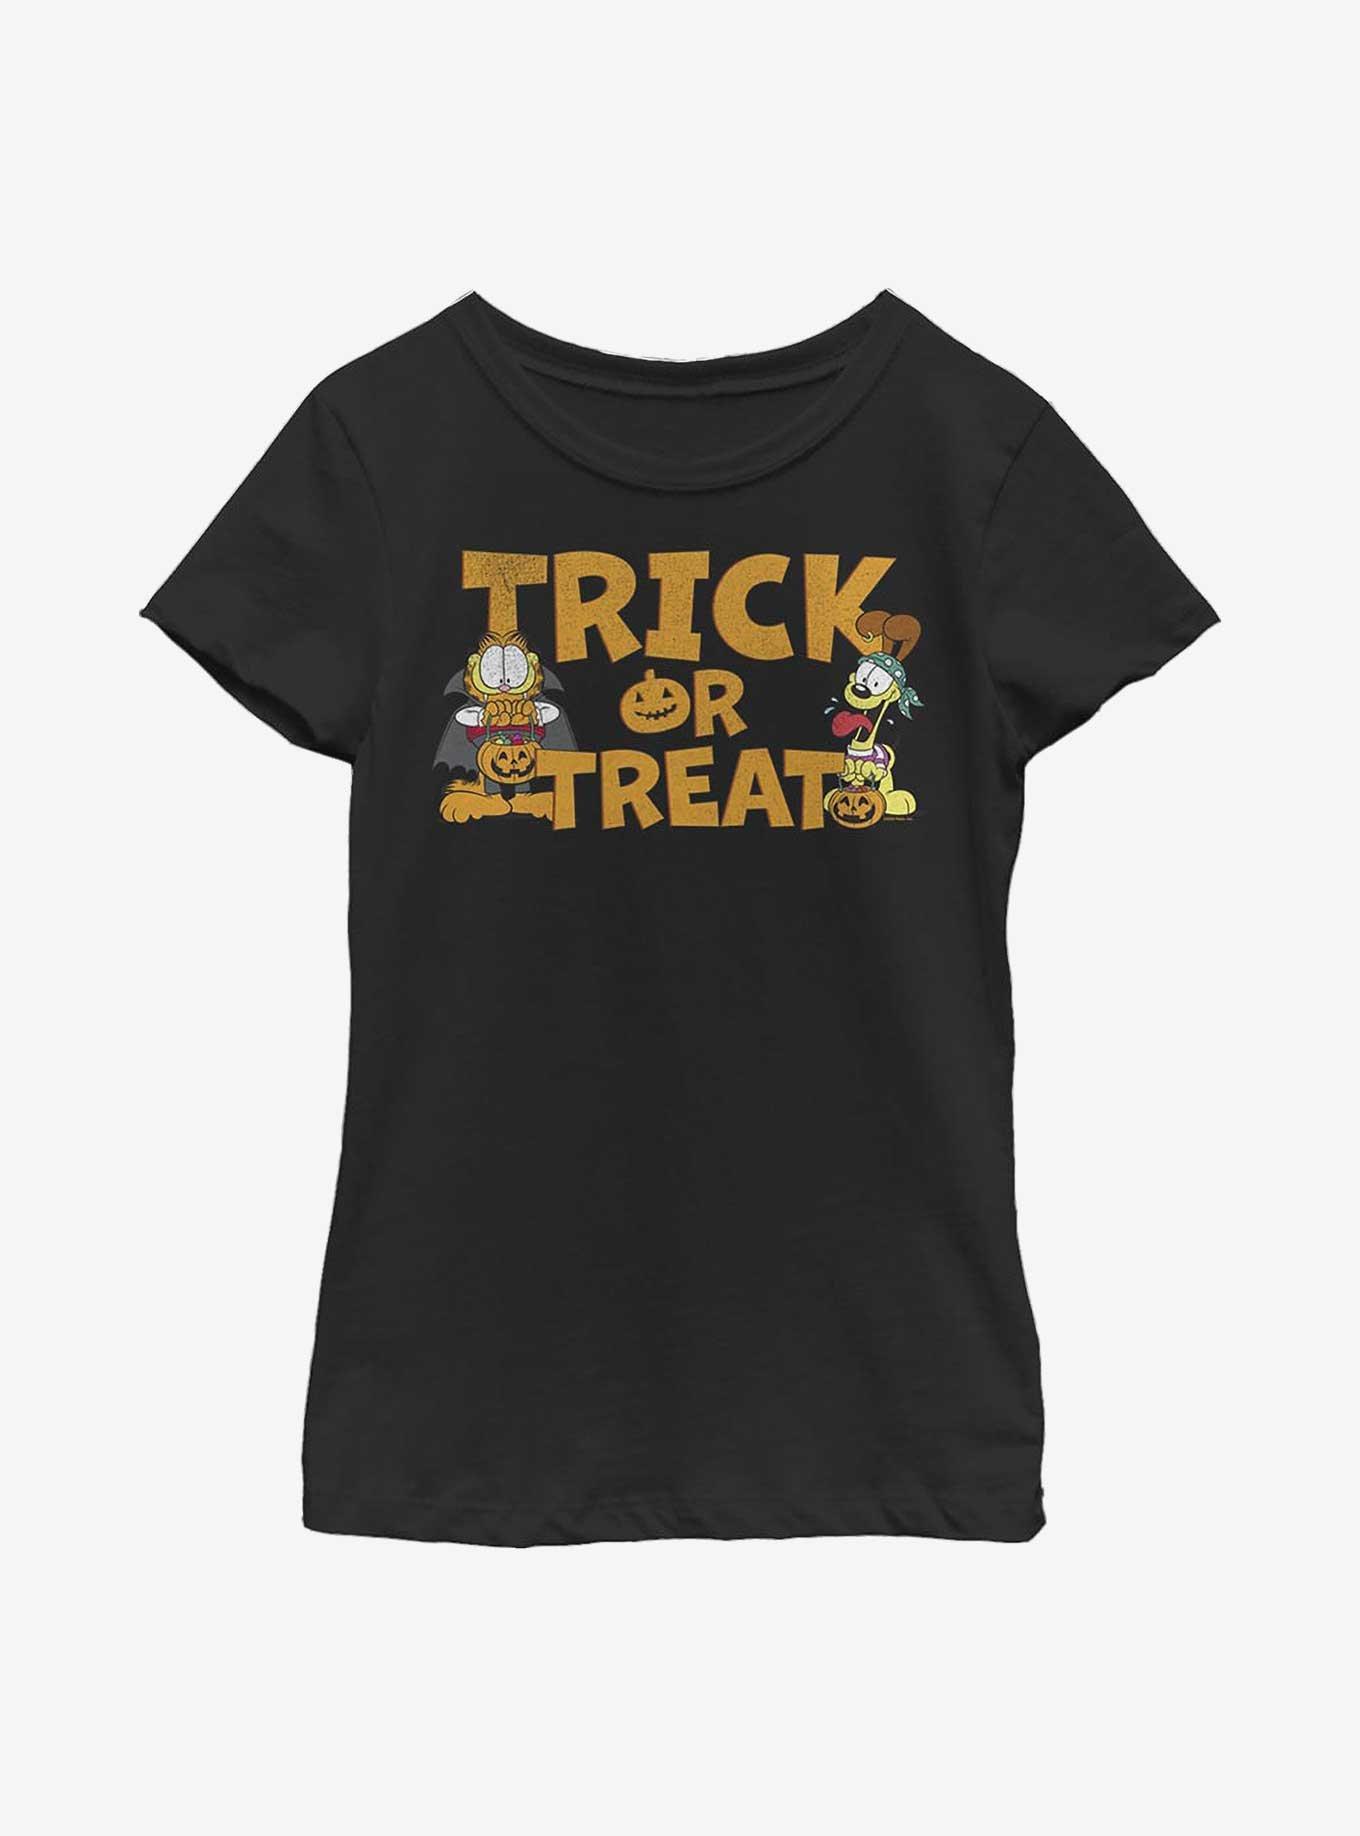 Garfield and Odie Halloween Trick or Treat Youth Girl's T-Shirt, BLACK, hi-res